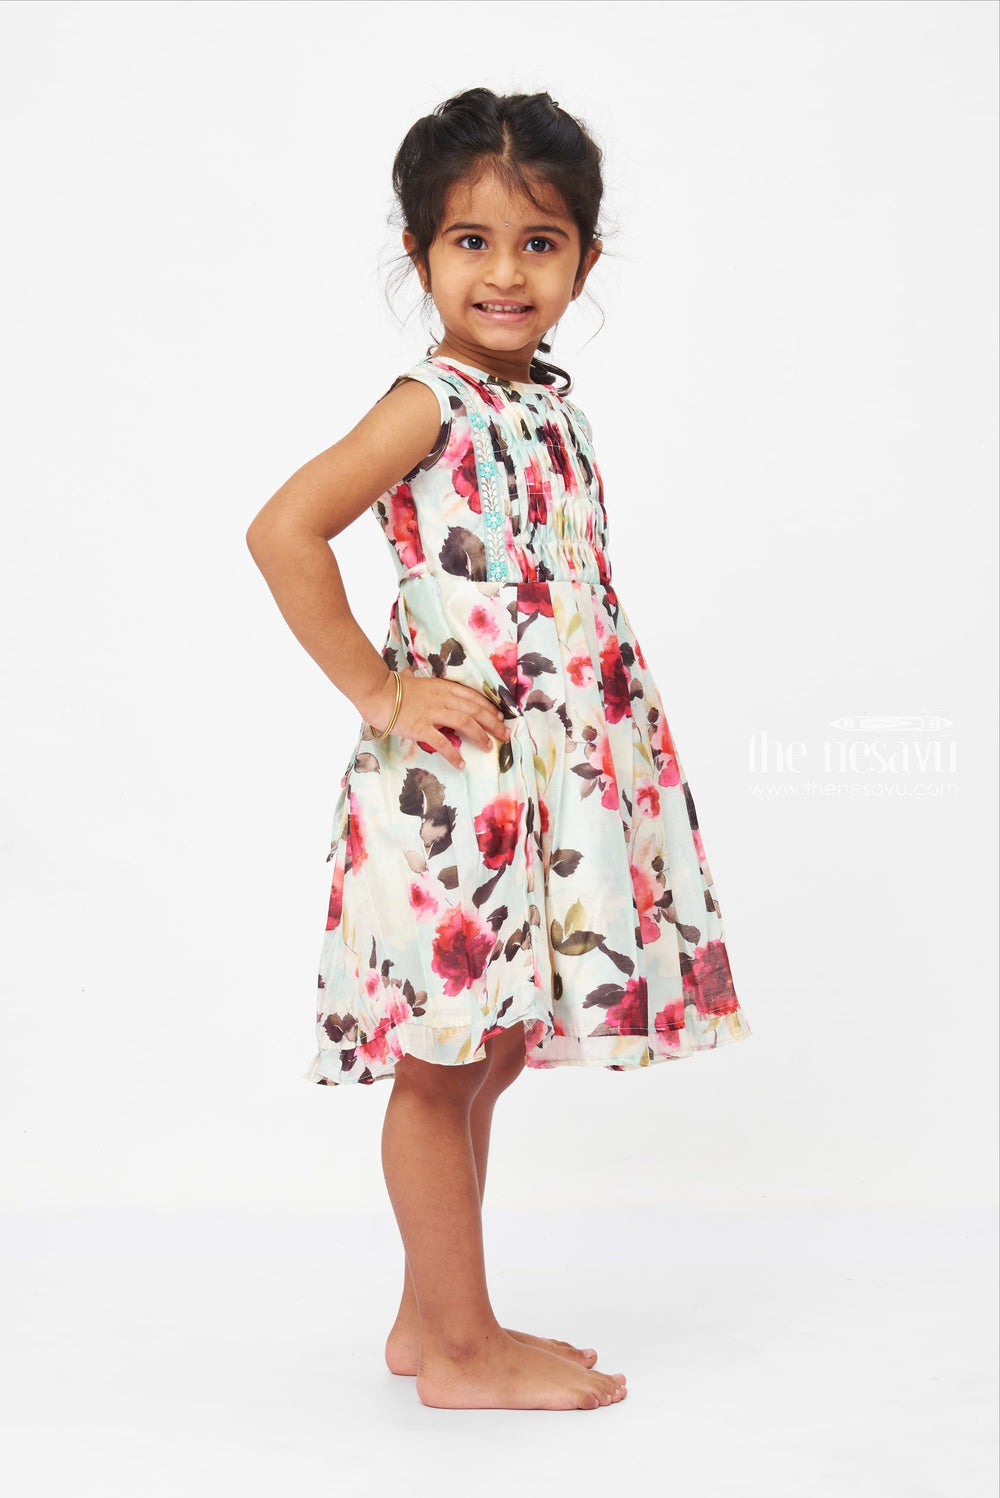 The Nesavu Girls Cotton Frock Watercolor Floral Dream Dress: Girls' Sleeveless Frock with Turquoise Lace Trim Nesavu Pastel Watercolor Floral Lace Dress for Girls | Sleeveless Spring & Summer Frock | The Nesavu